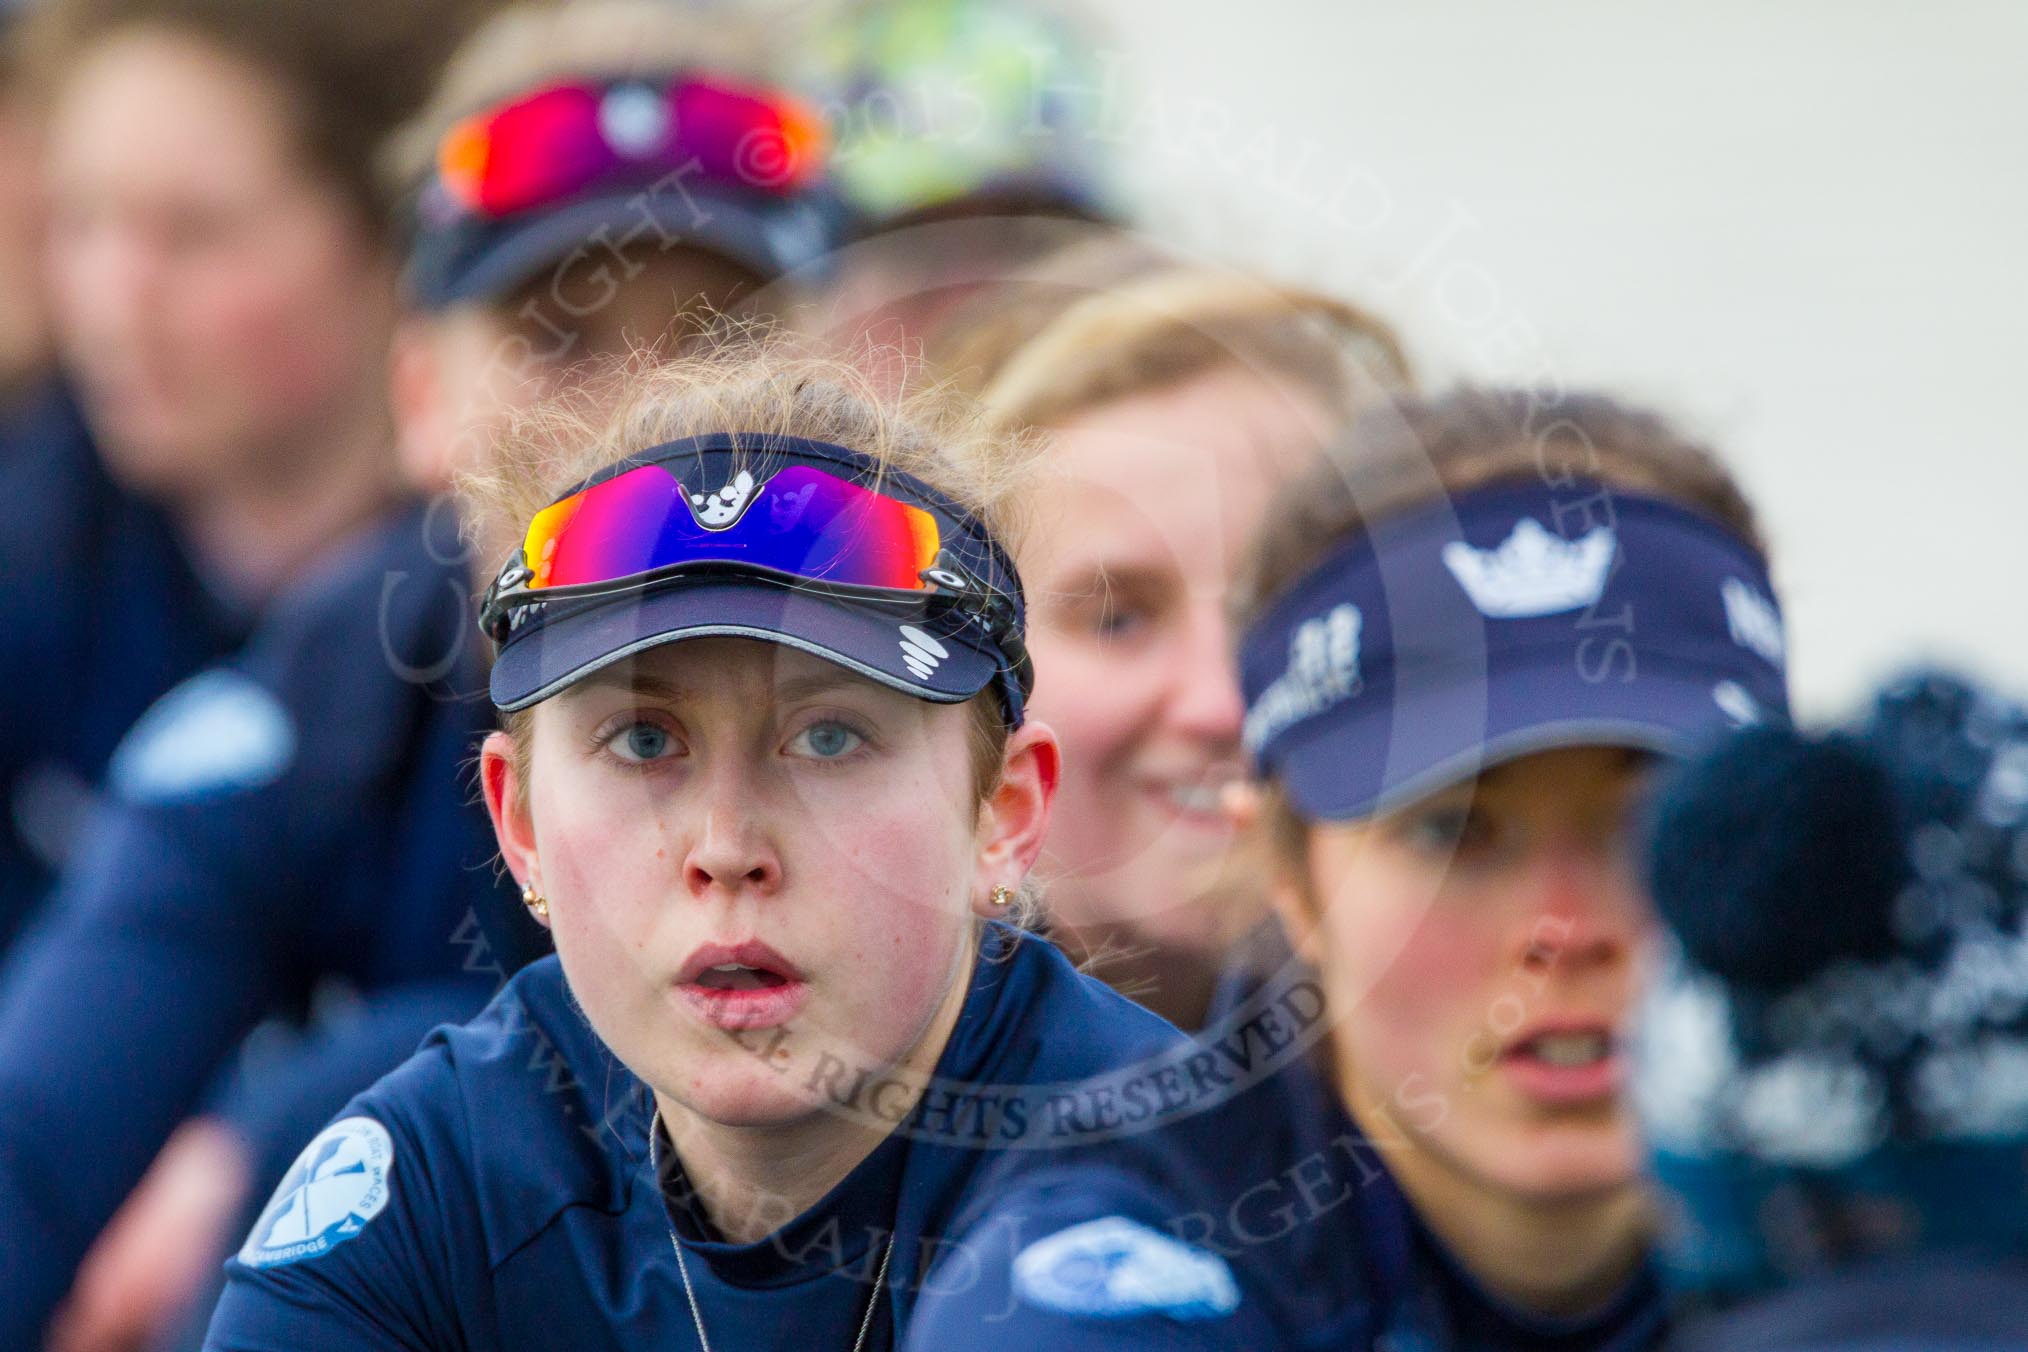 The Boat Race season 2016 - OUWBC training Wallingford: Maddy Badcott, OUWBC president and 7 seat in the Oxford Blue Boat.
River Thames,
Wallingford,
Oxfordshire,

on 29 February 2016 at 16:15, image #97